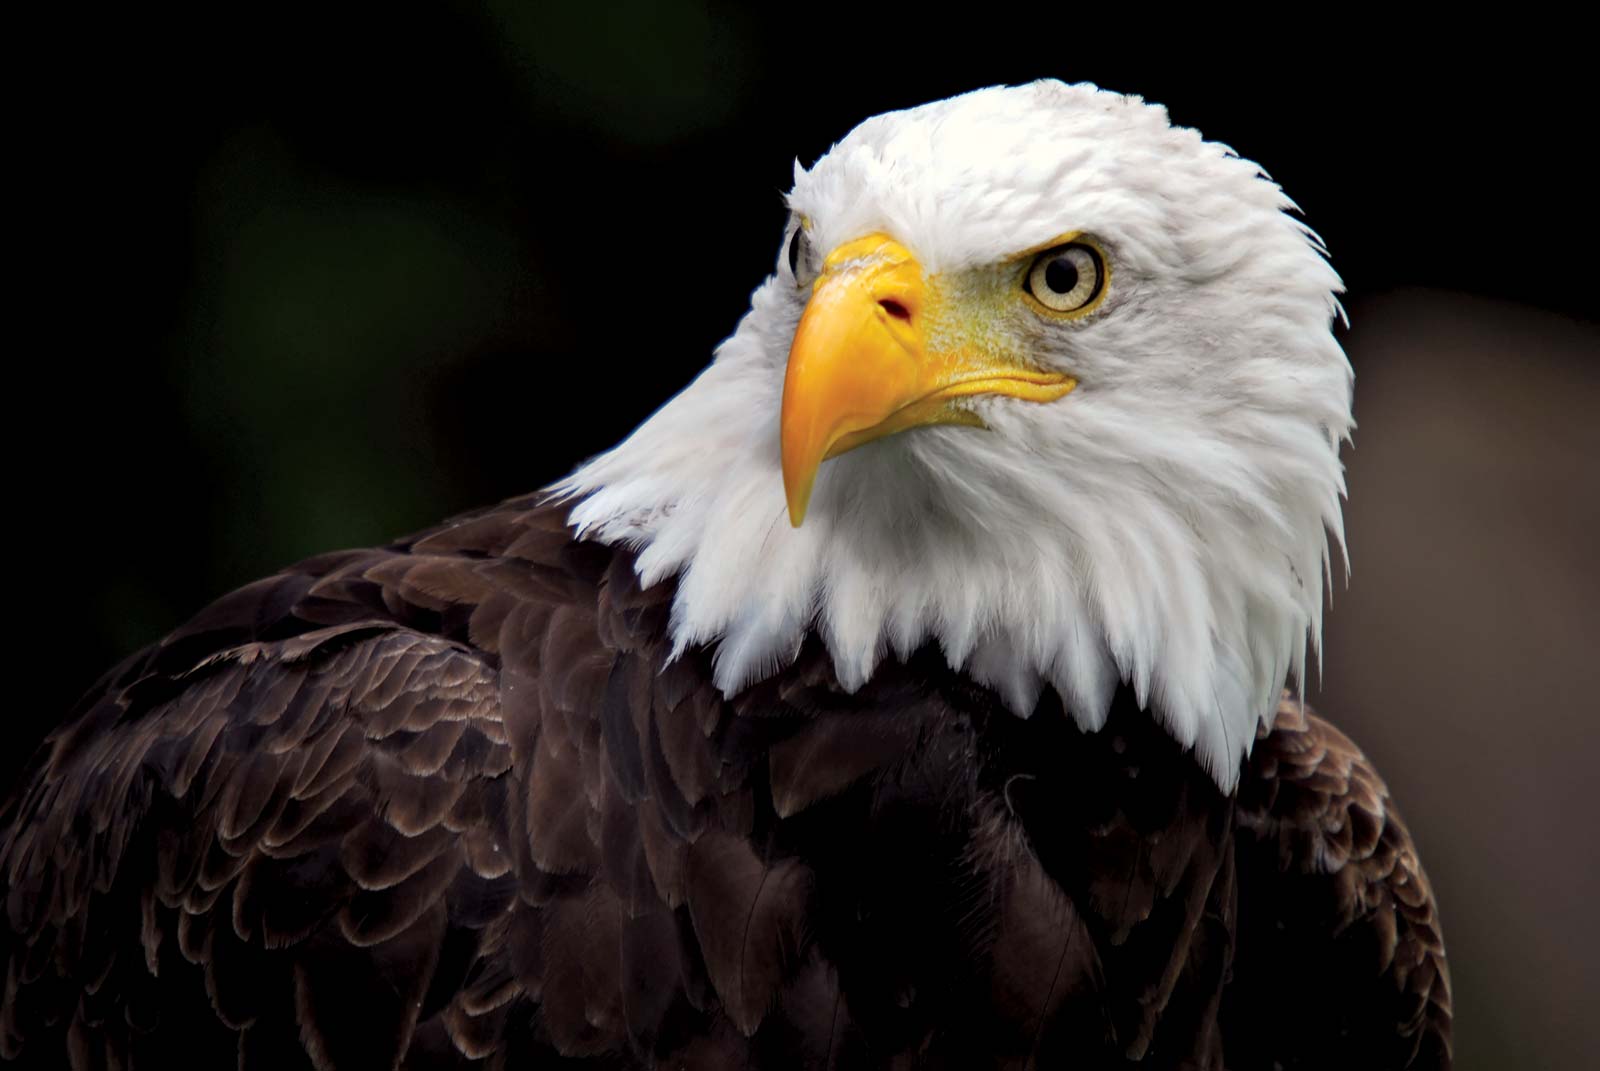 Can You Match These Animals With Their Natural Food Source? Bald Eagle